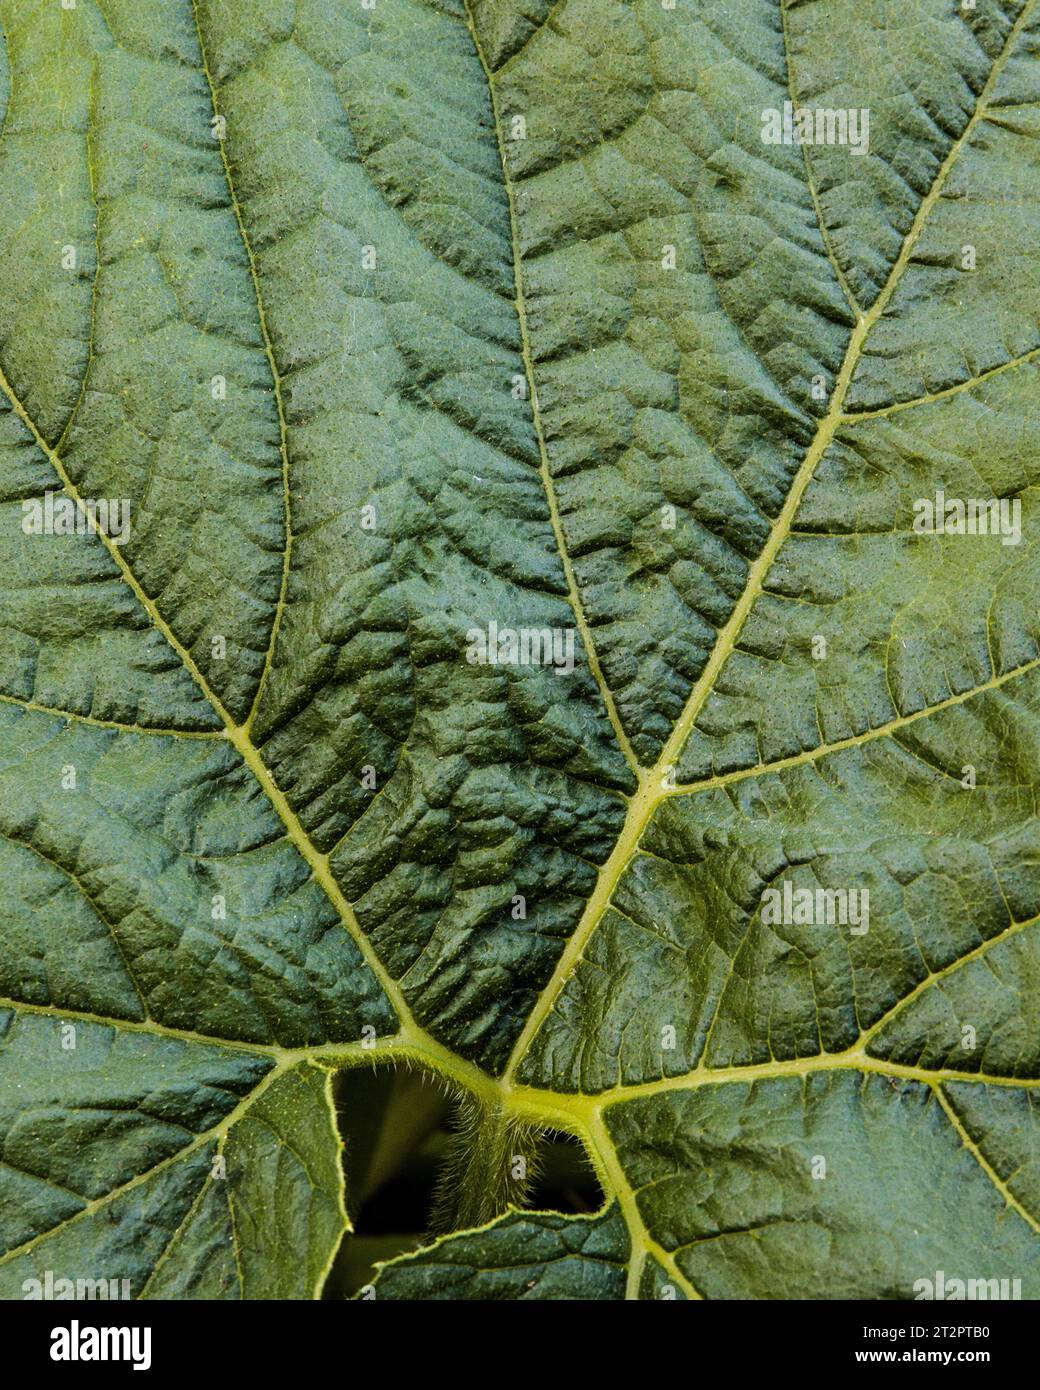 Close up view of a pumpkin plant leaf Stock Photo